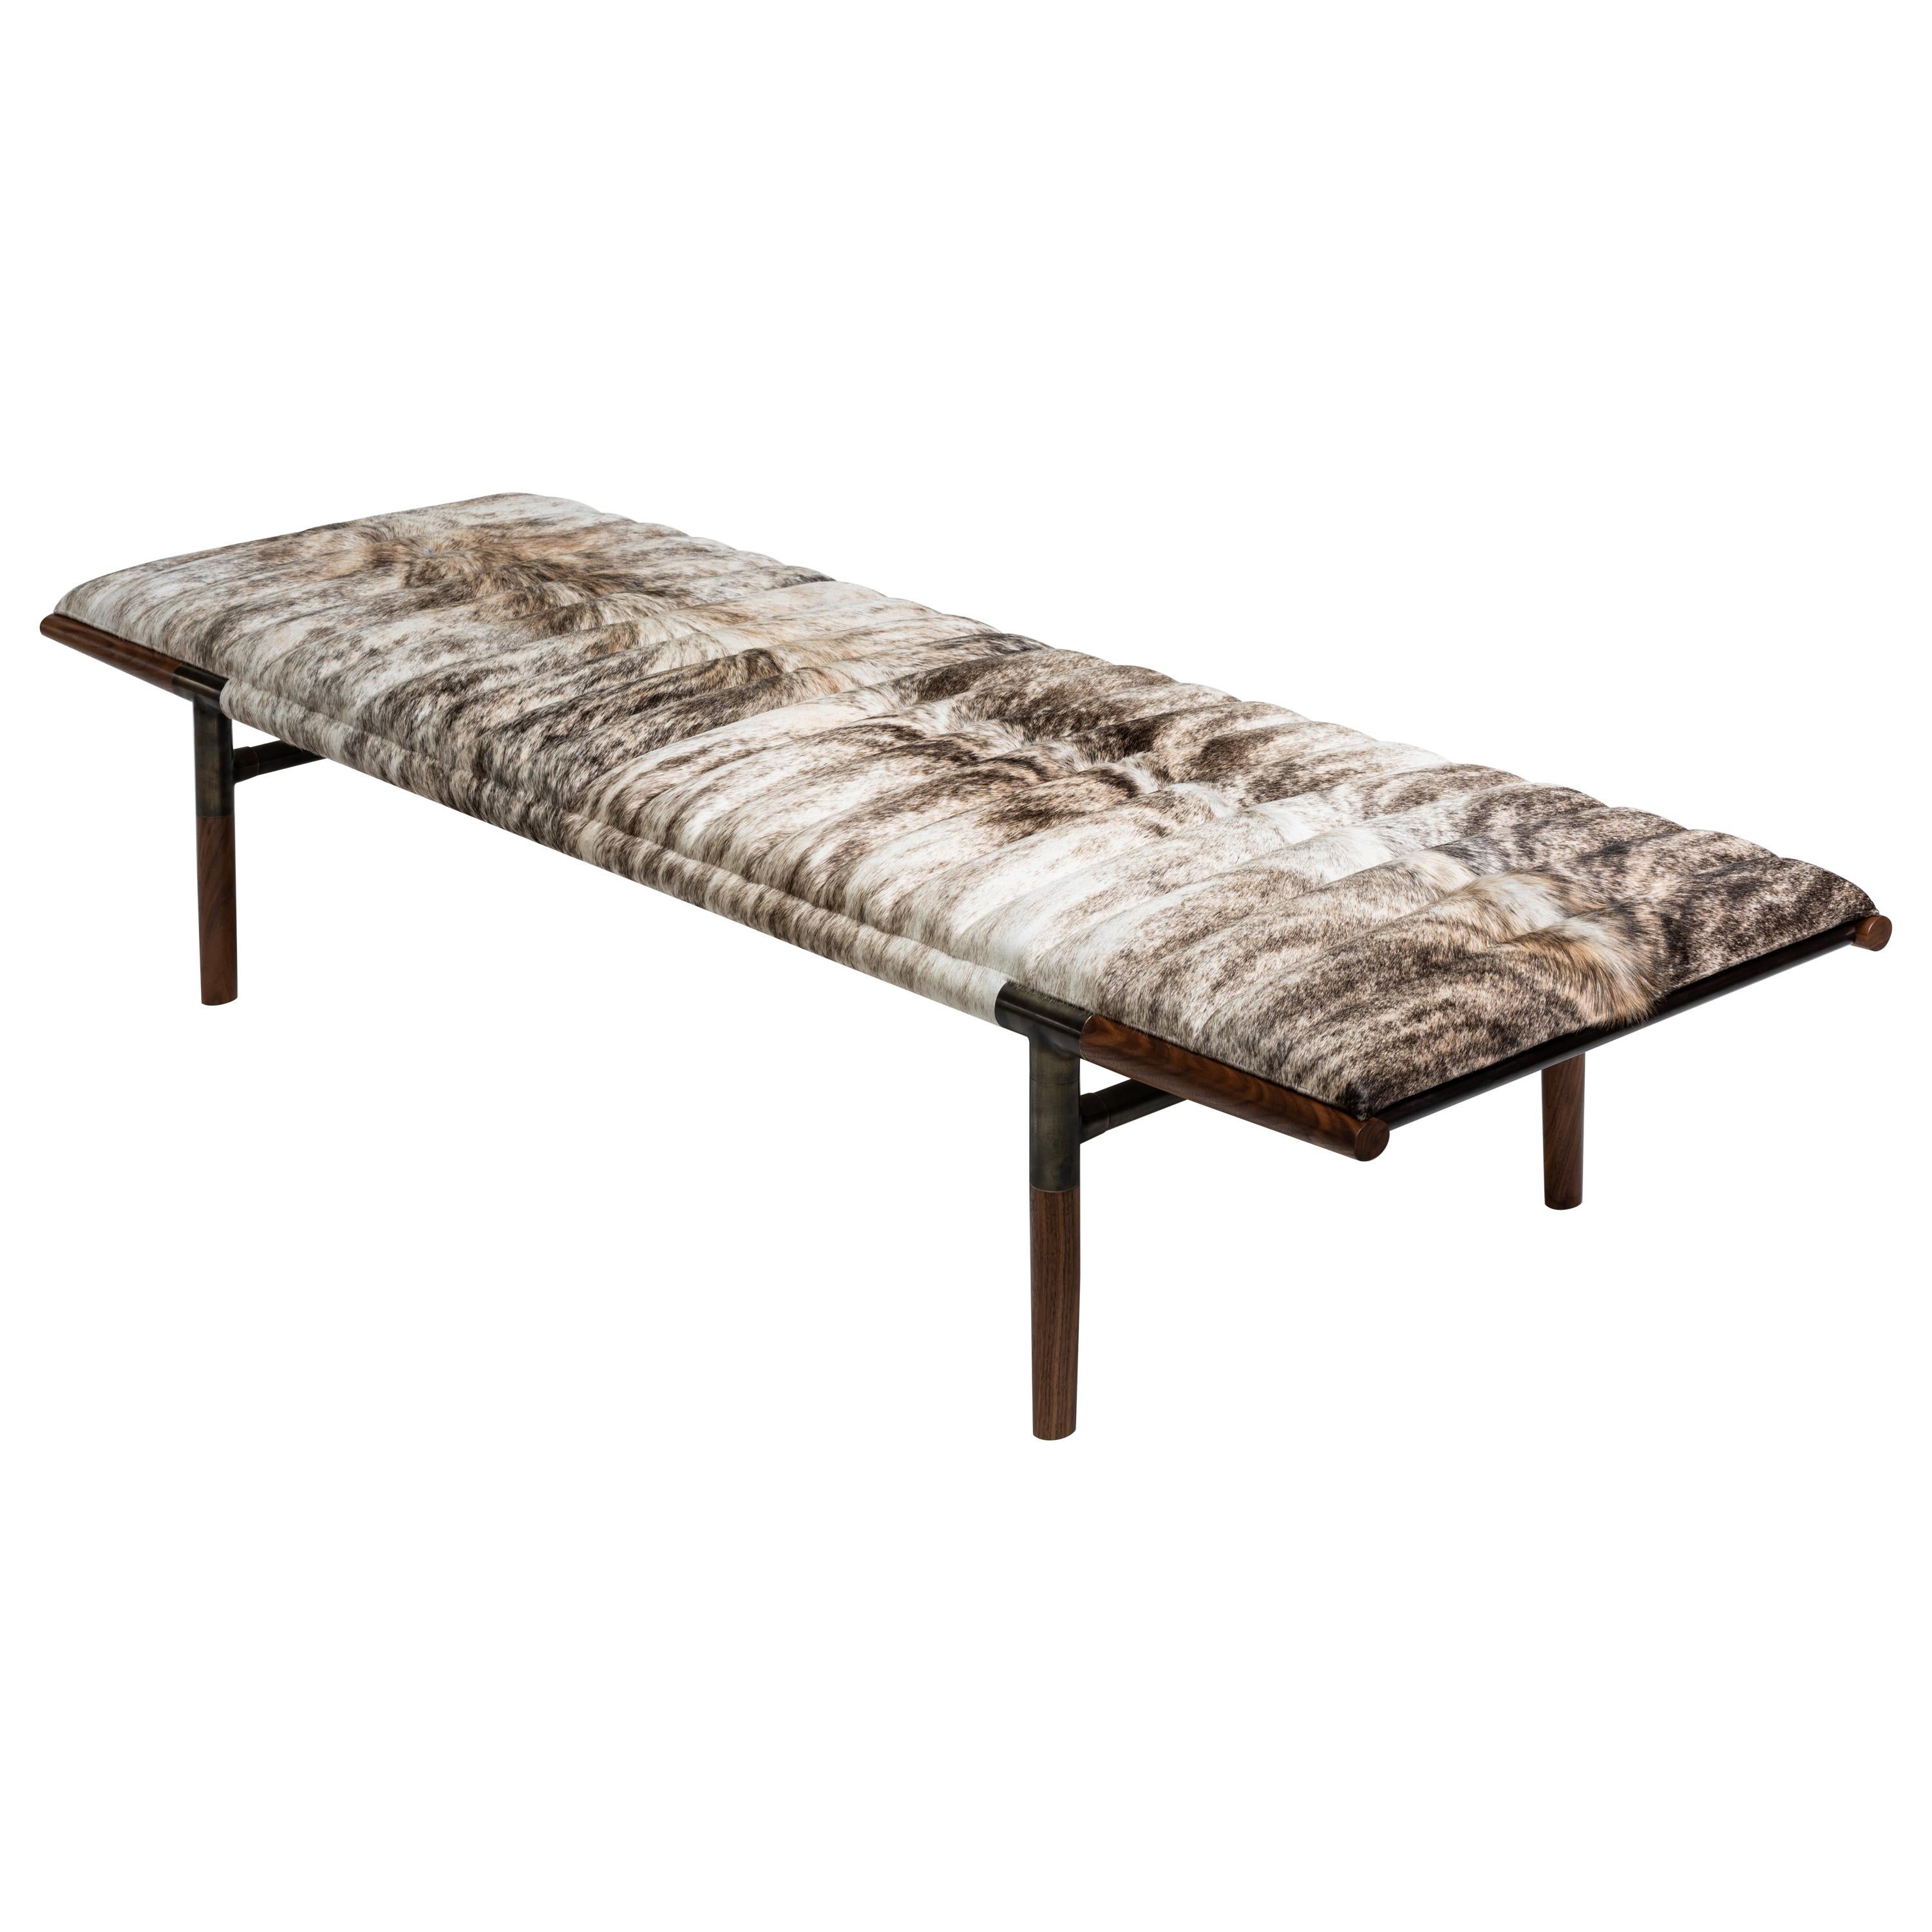 EÆ Daybed in Grey Brindle Hide, Walnut, Blackened Brass by Erickson Aesthetics For Sale